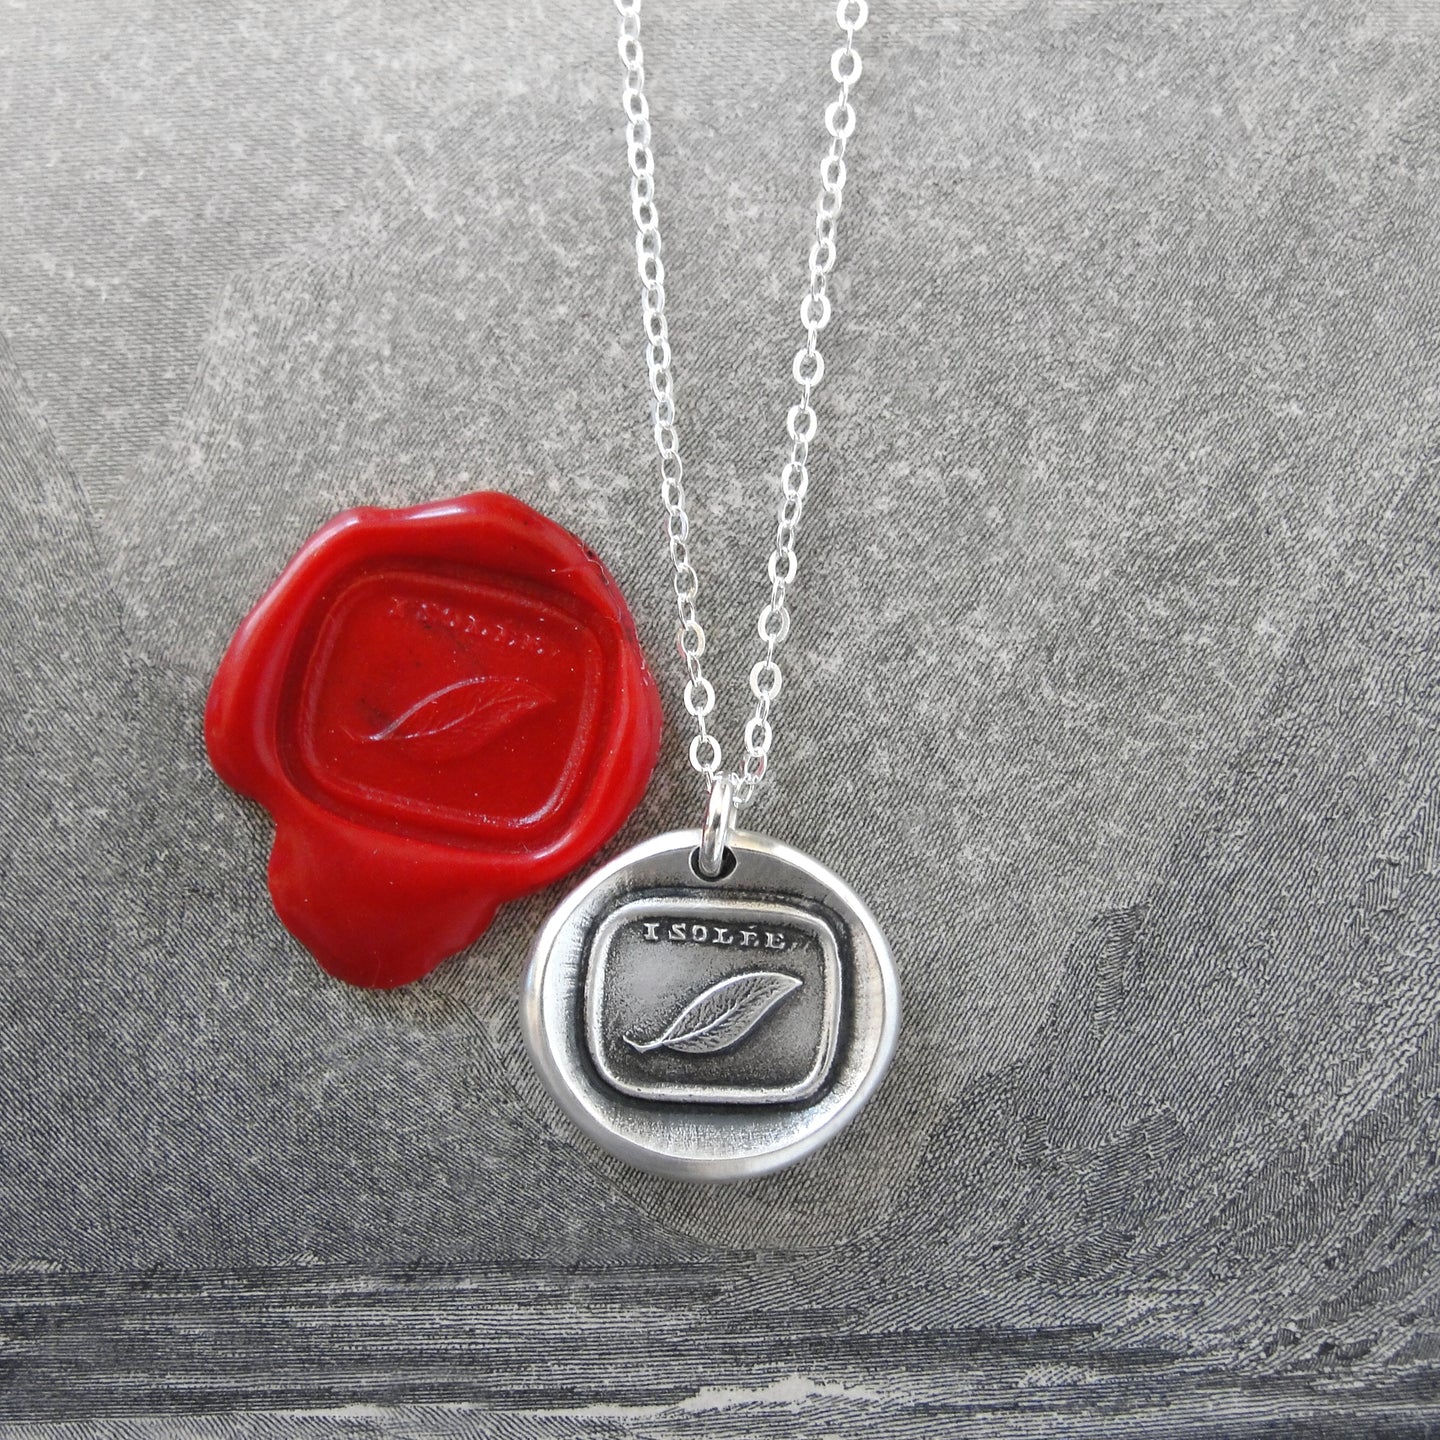 Desolate - Wax Seal Necklace Mourning Sadness Silver Leaf - RQP Studio